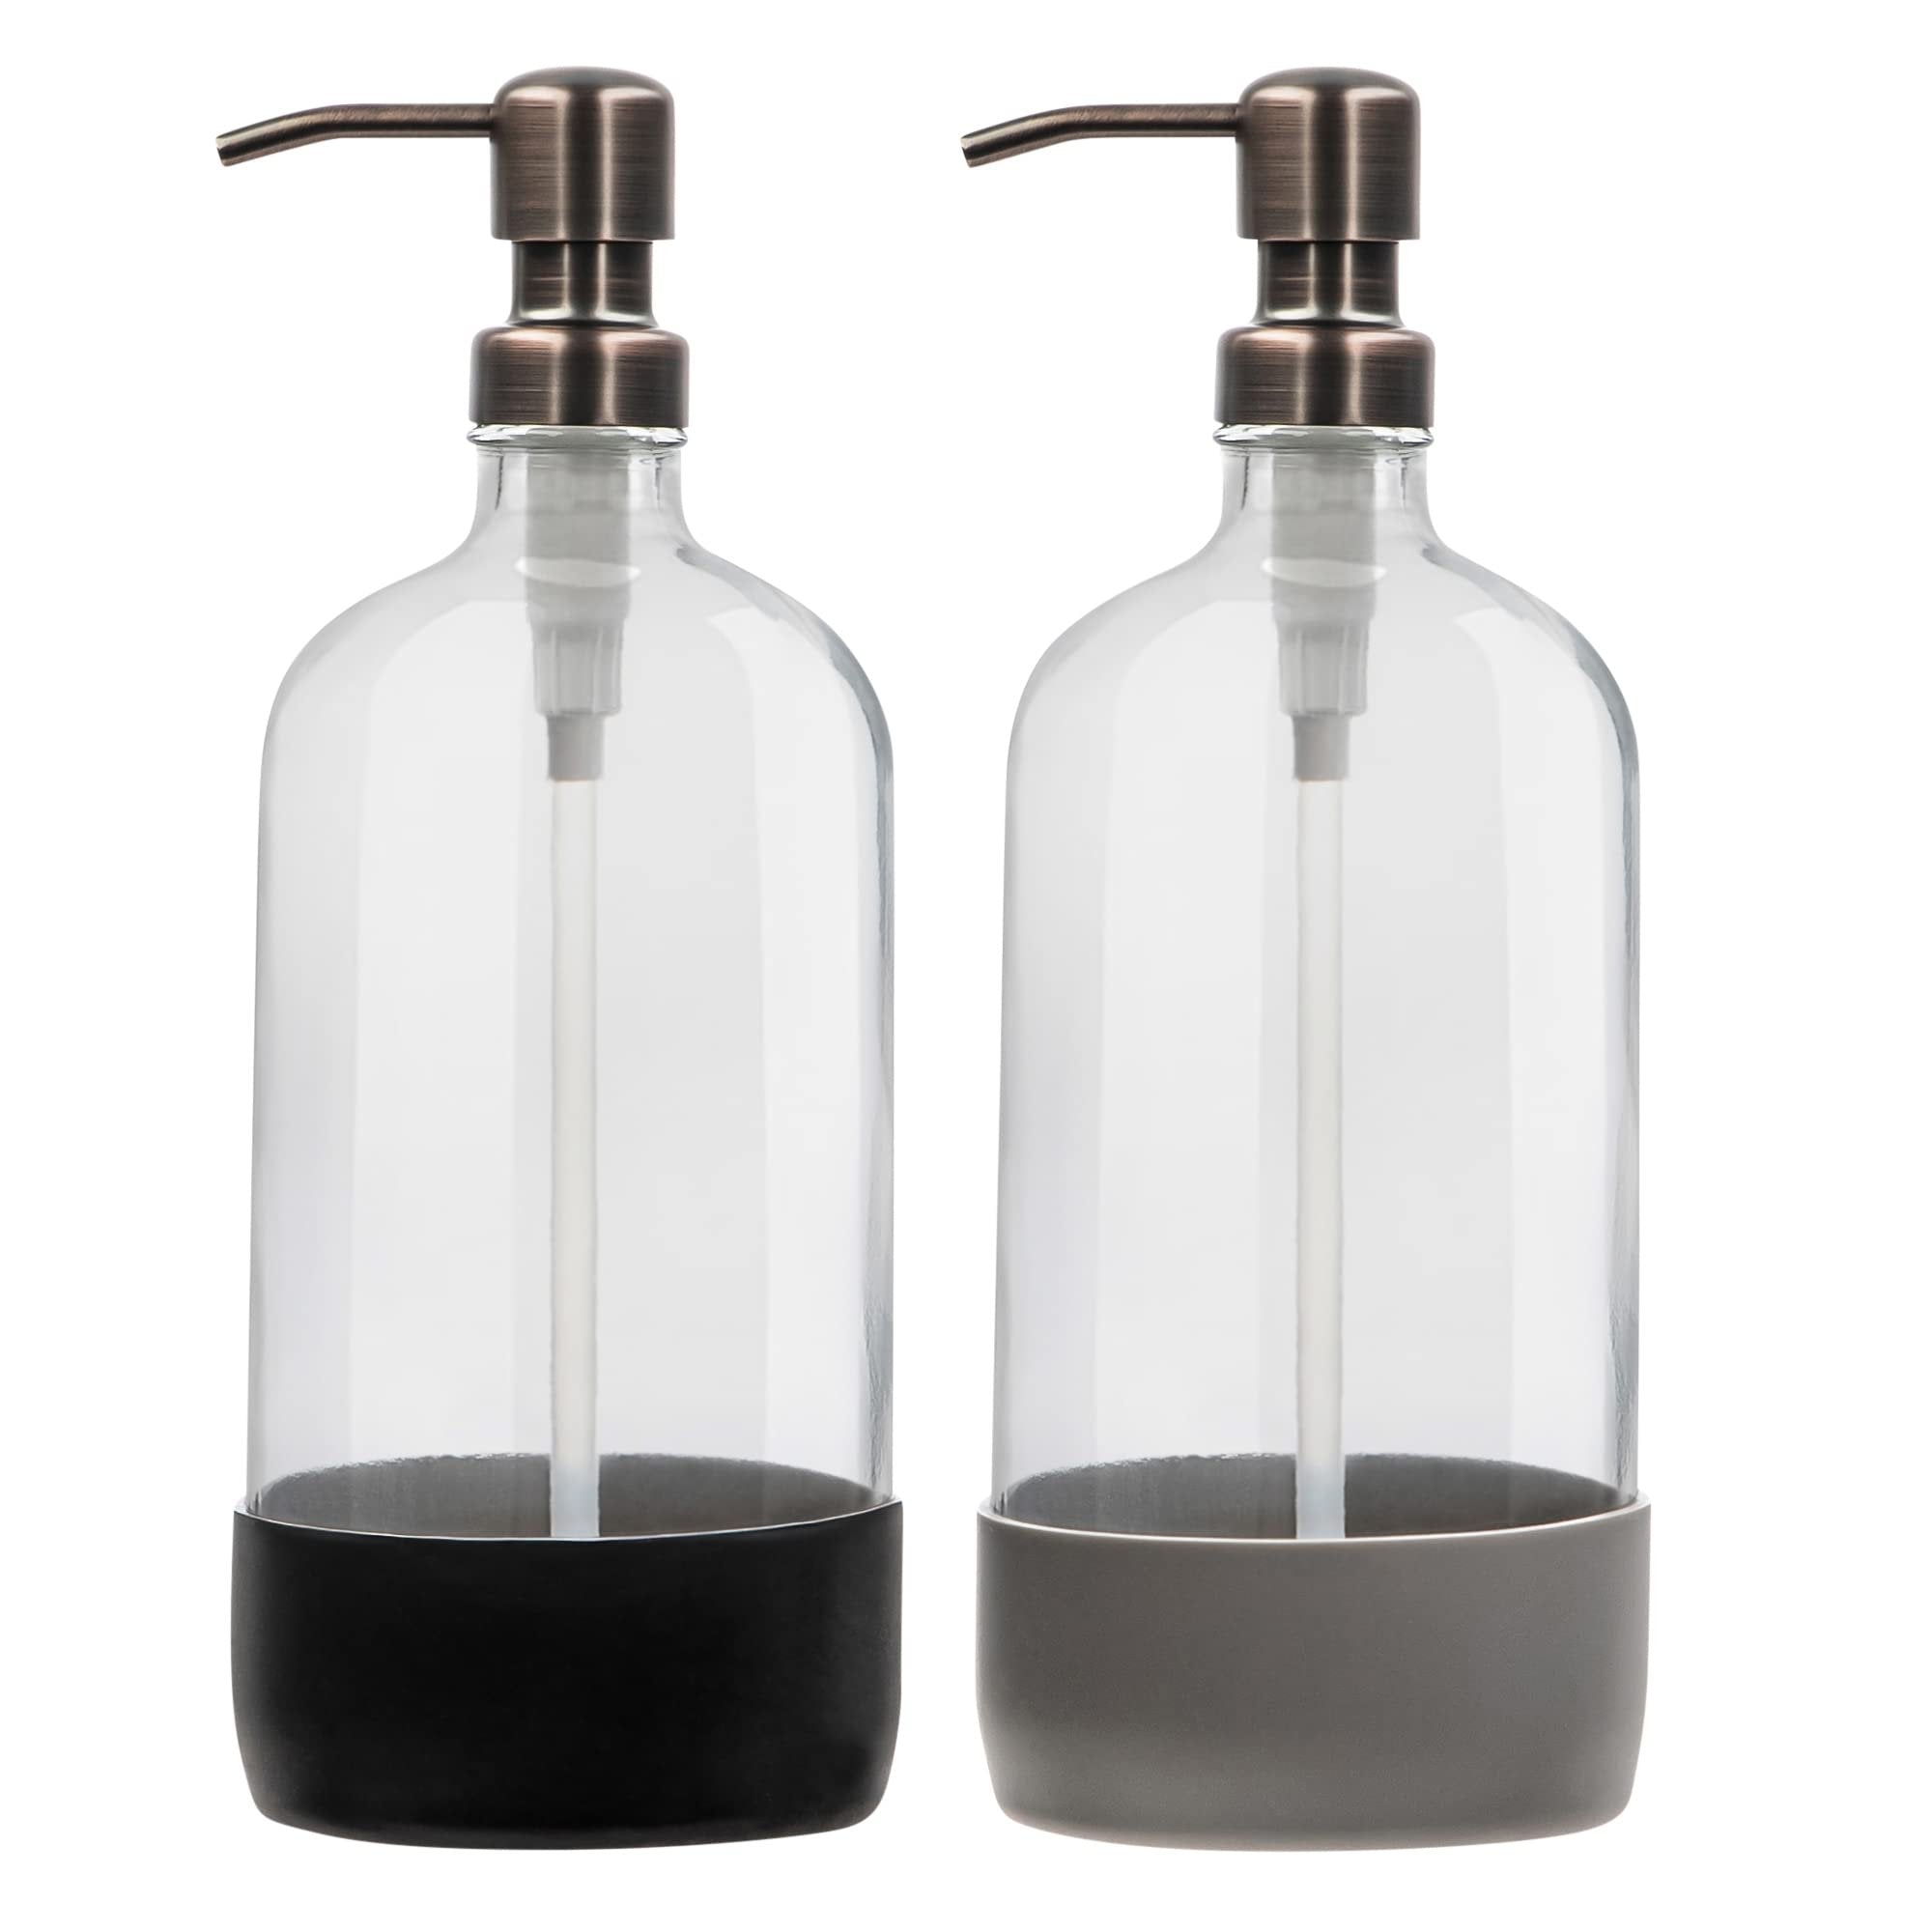 32 oz Glass Pump Bottle Rustproof Stainless Steel Pump, Funnel, and Lids. Modern Farmhouse Vintage Jar, Large Glass Shampoo Bottles with Pump and Laundry Soap Dispenser - Copper